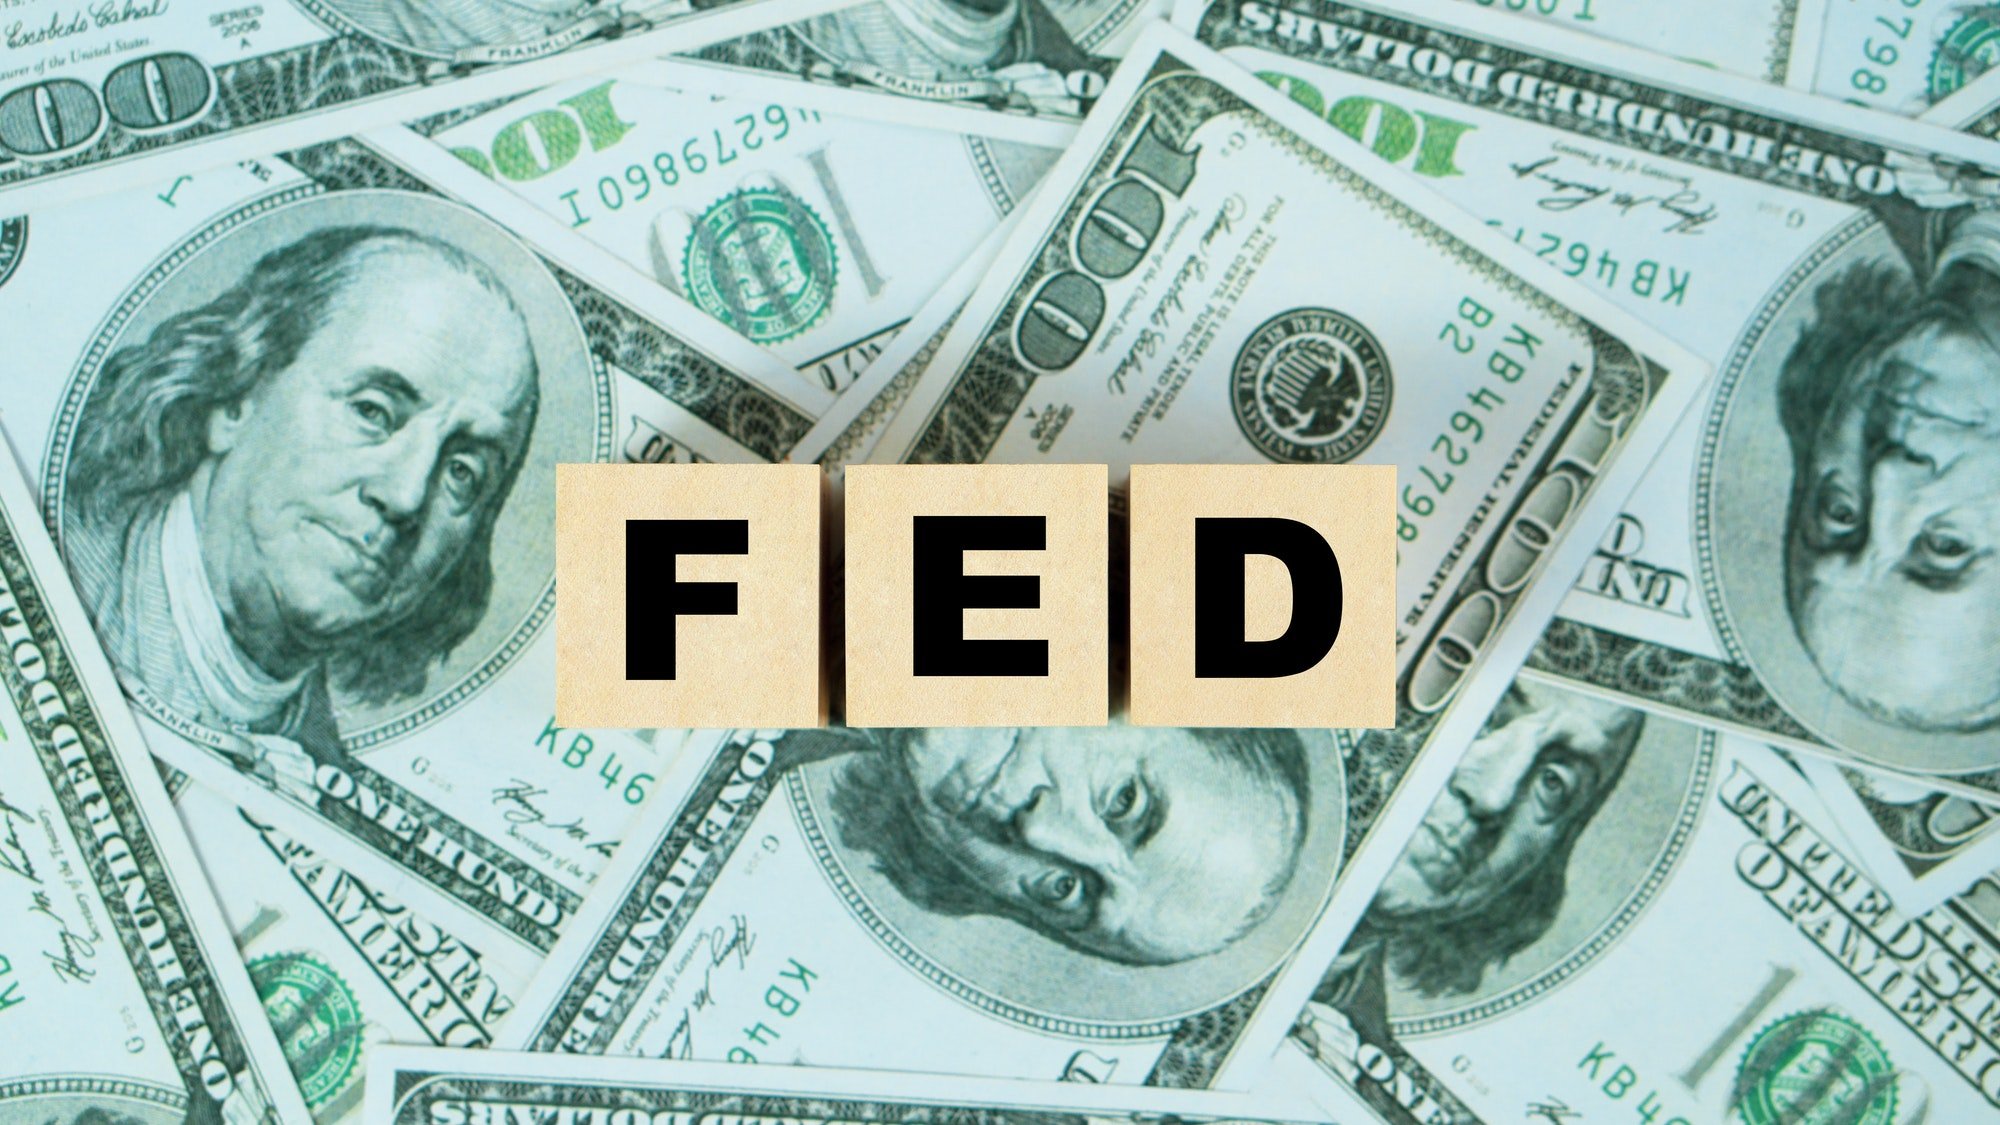 FED word on Wooden block with dollar backgound.The Federal Reserve to control interest rates.